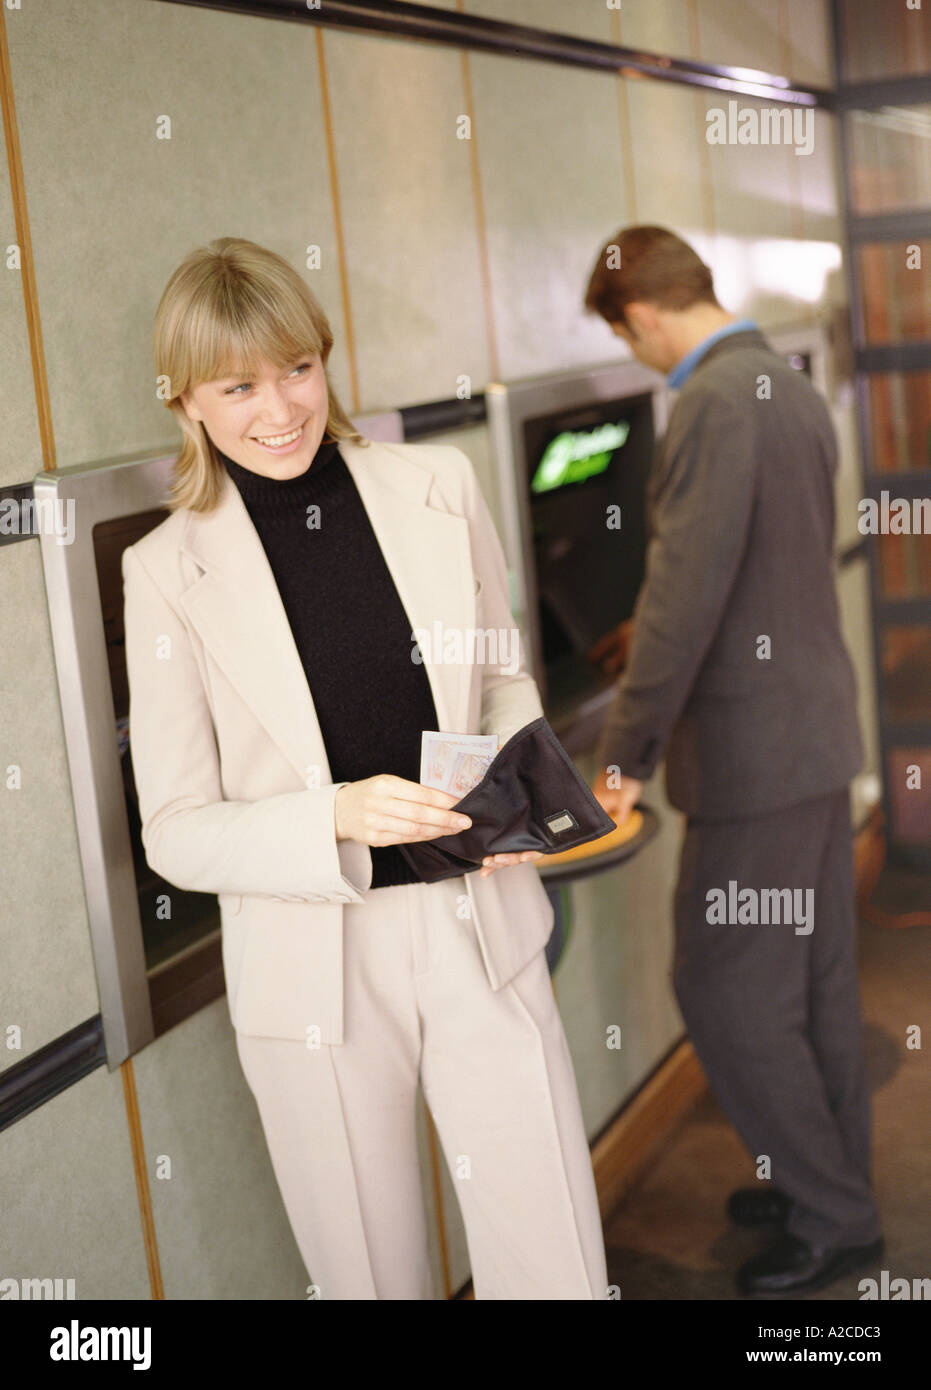 Withdrawing cash from dispenser Stock Photo